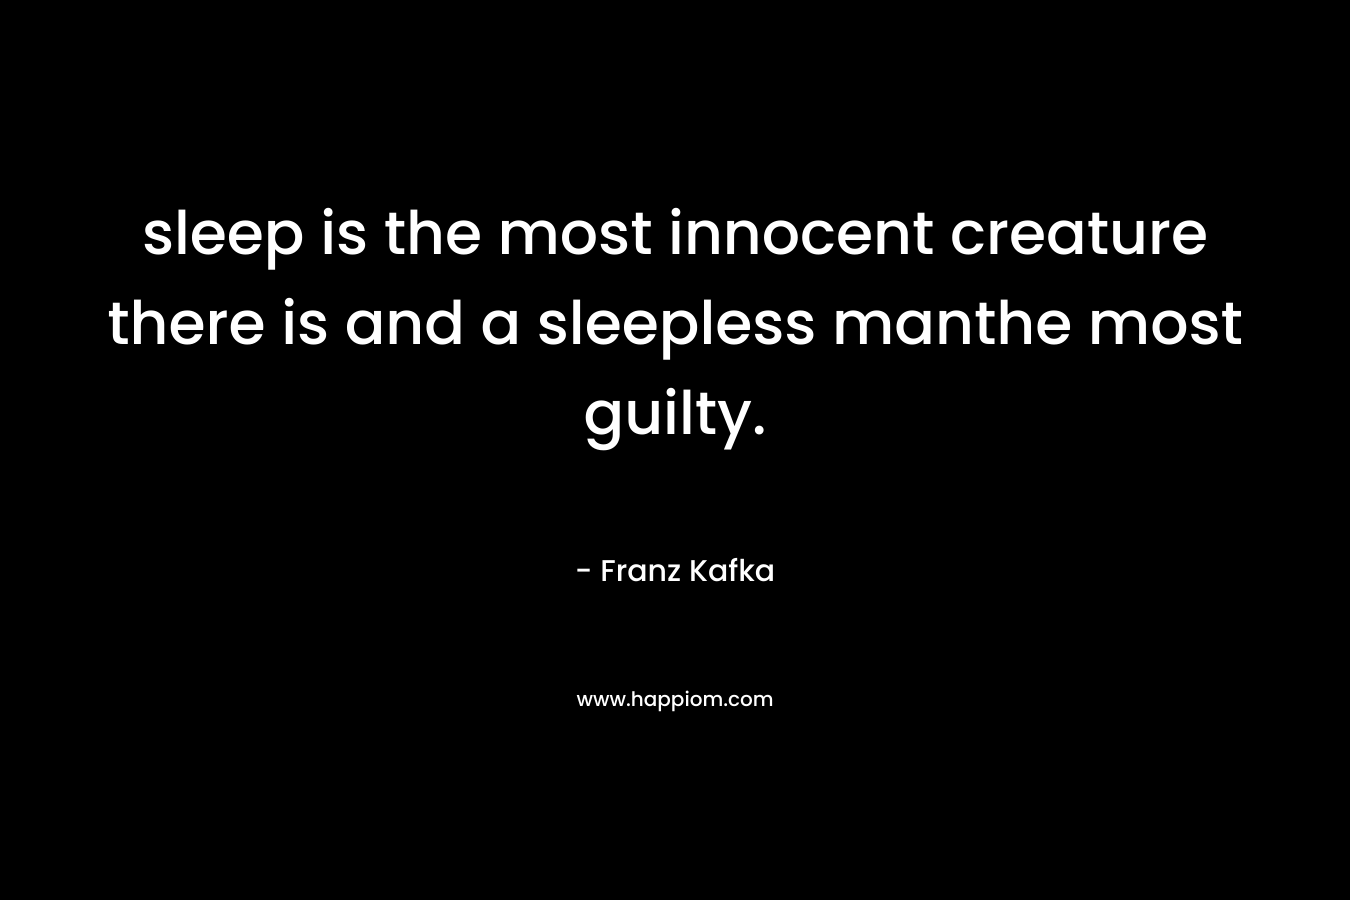 sleep is the most innocent creature there is and a sleepless manthe most guilty. – Franz Kafka